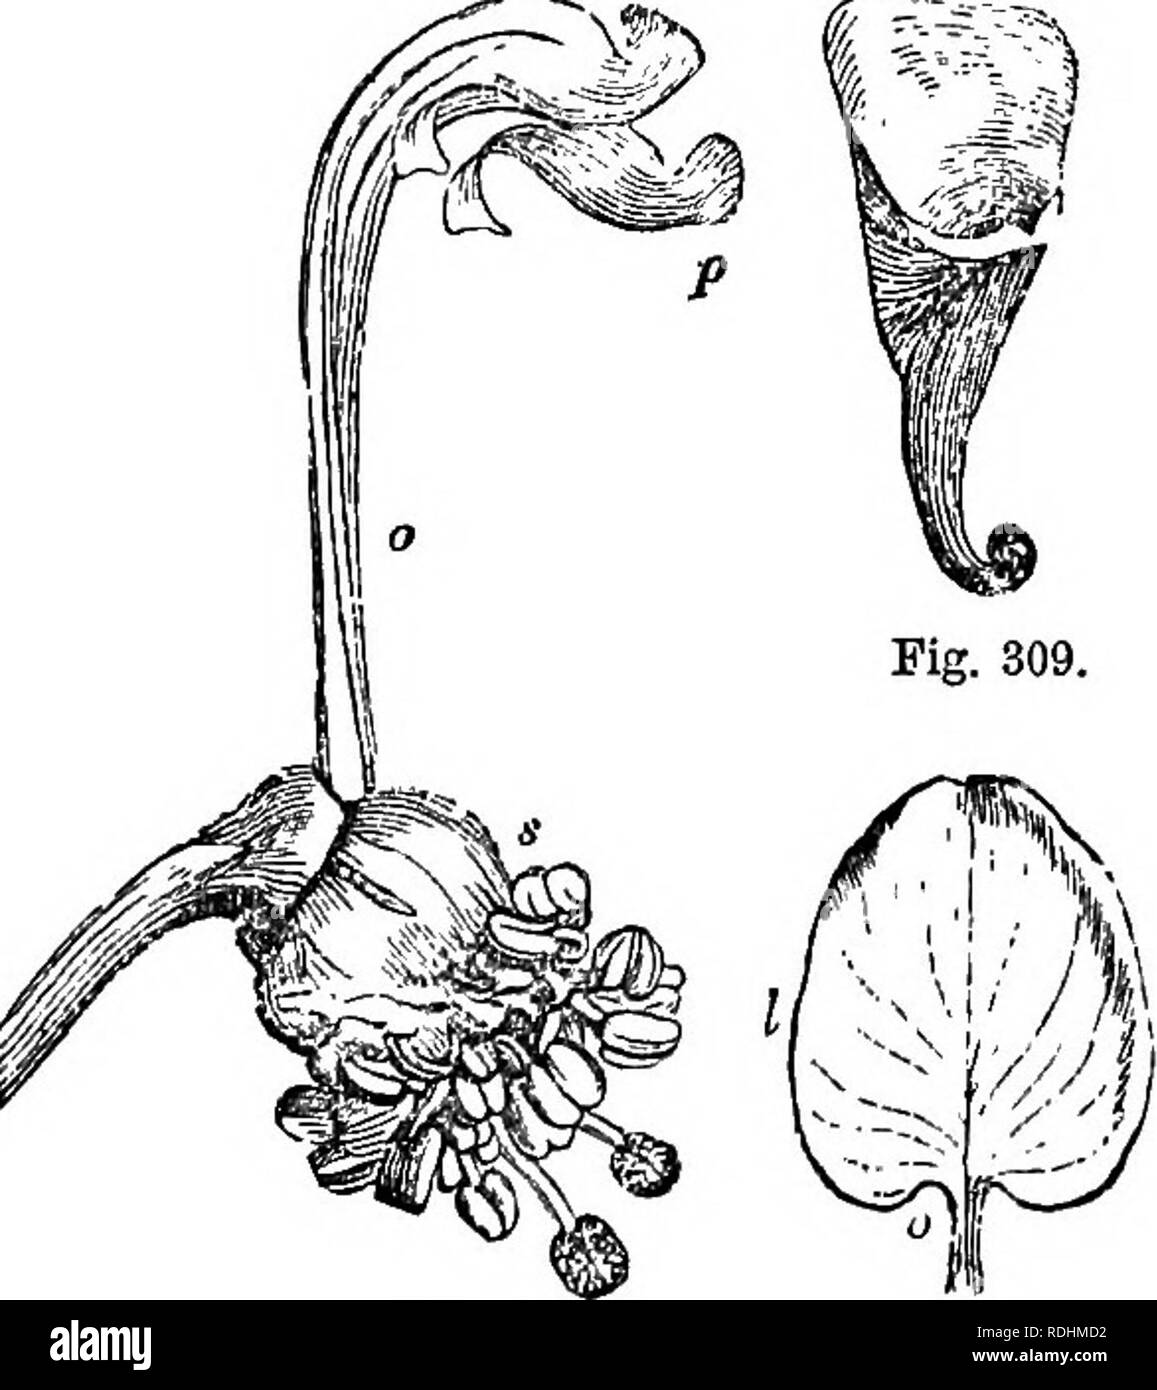 . A Manual of botany : being an introduction to the study of the structure, physiology, and classification of plants . Botany. 202 FLORAL ENVELOPES—COEOLLA. summit of the petals in the form of a long process, as in Strophanthus hispidus, where it extends for seven inches; and at other times it ends in a free point or cuspis, and the petal becomes cuspidate; or the pro- longed extremity is folded downwards or inflexed, as in Umbelliferse (fig. 306), so that the apex approaches the base. If the median vein divides into two, the space between, the divisions may be filled up so as to leave only a  Stock Photo